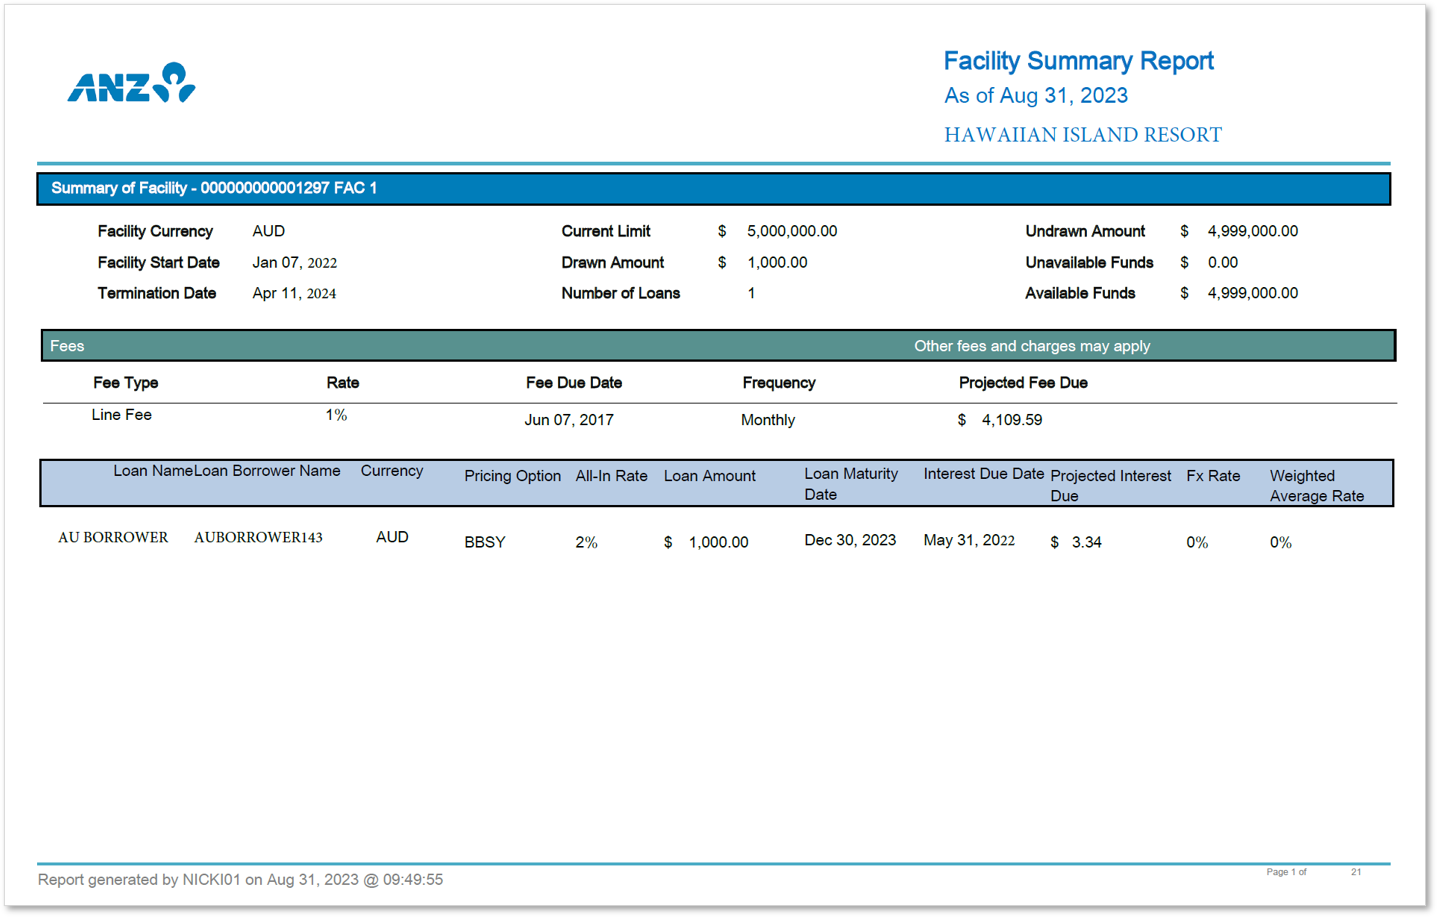 FACSUM-Facility Summary Report.png